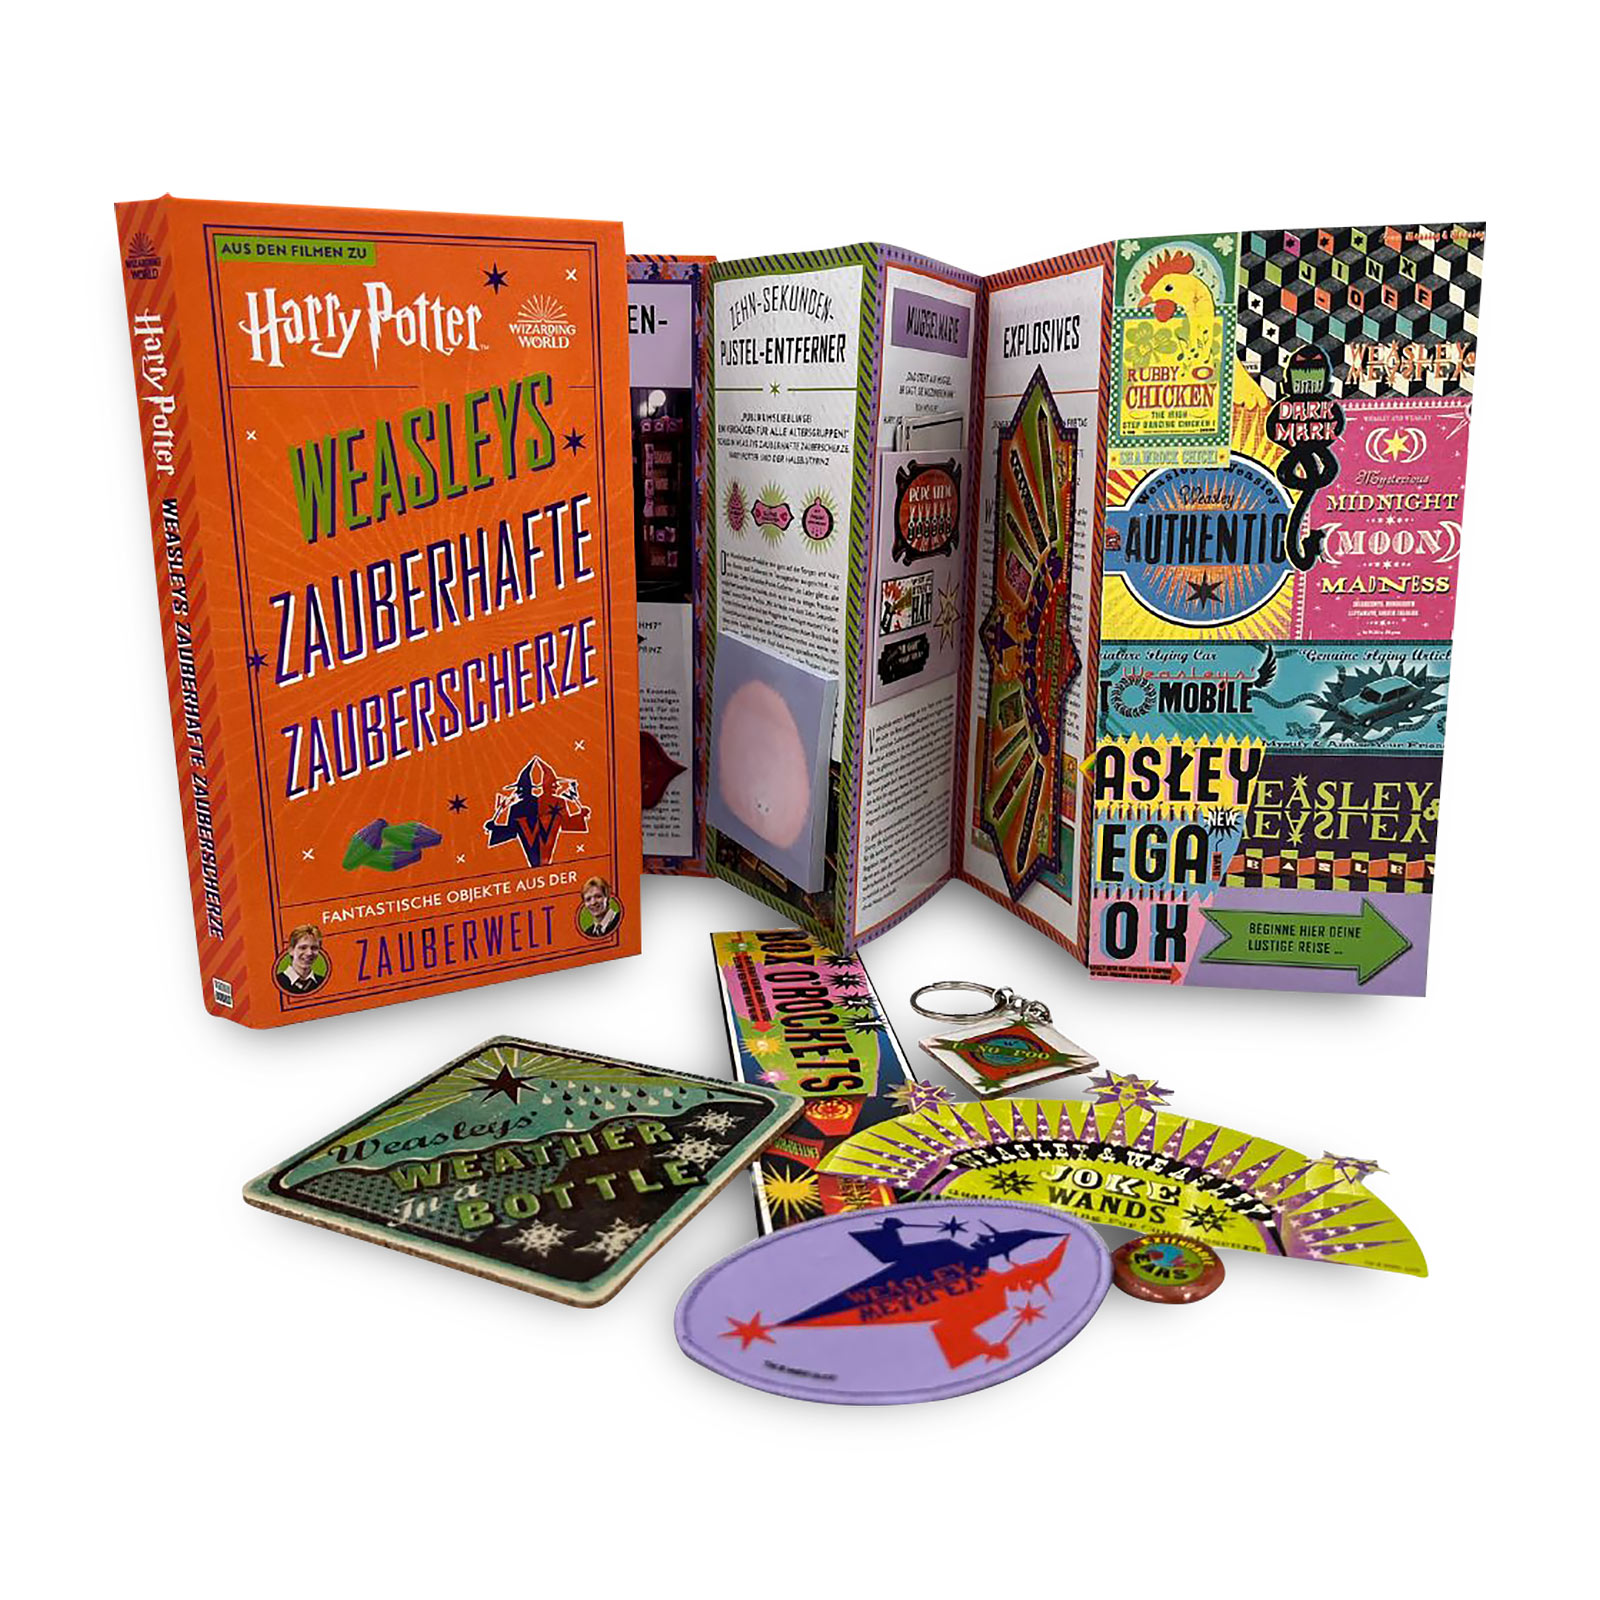 Harry Potter - Weasley's Wizard Wheezes - Fantastic Objects from the Wizarding World